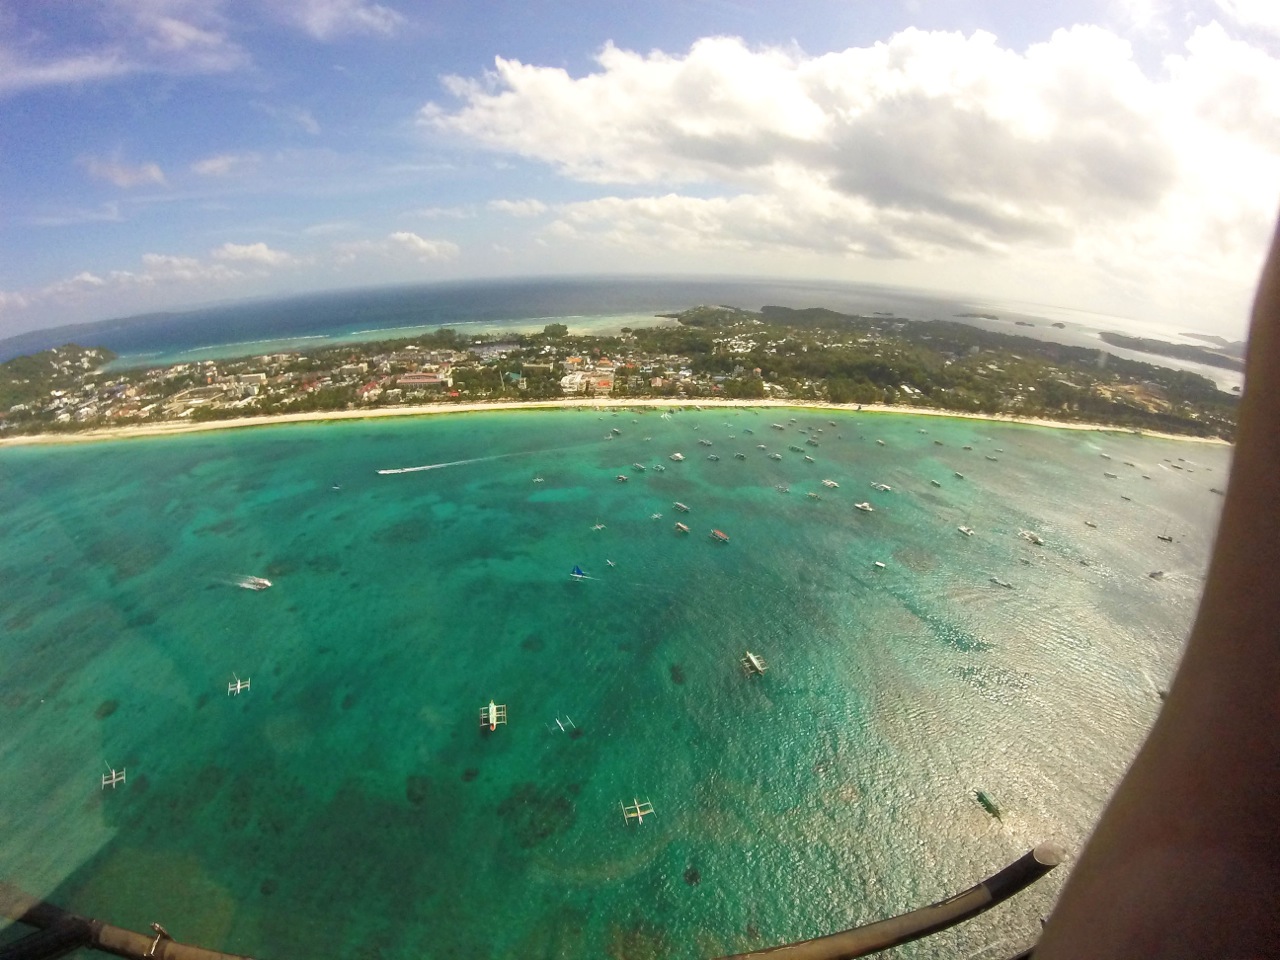 Boracay from the air: The best view of the island!